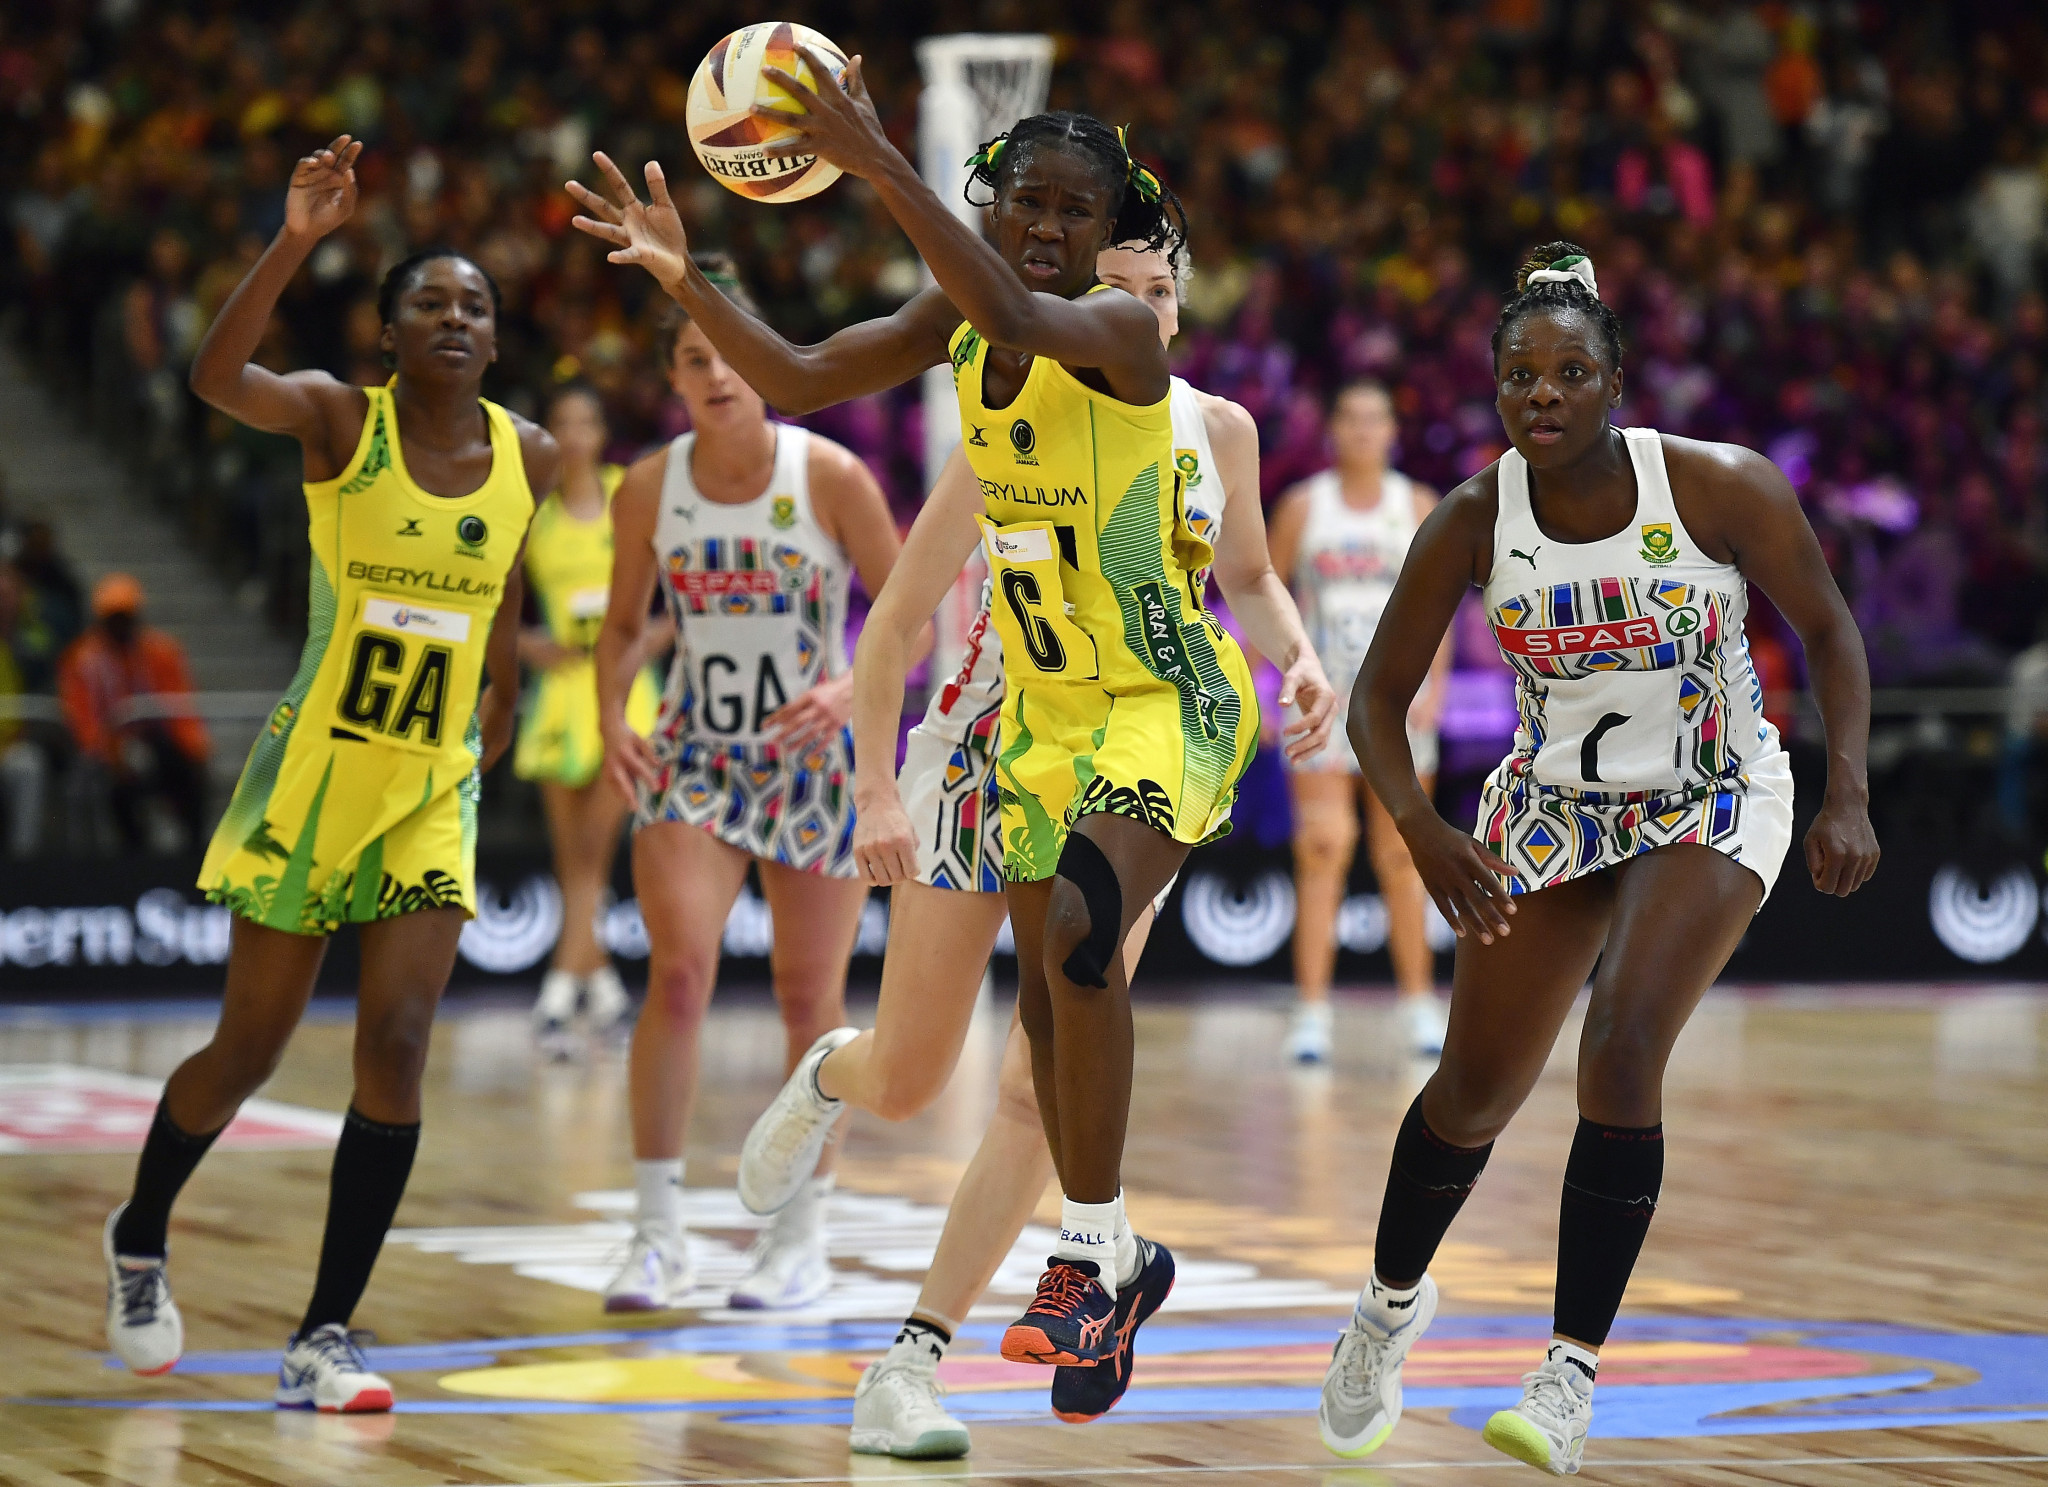 Jamaica beat hosts South Africa 67-49 in one of the standout ties of the first stage of the Netball World Cup ©Getty Images